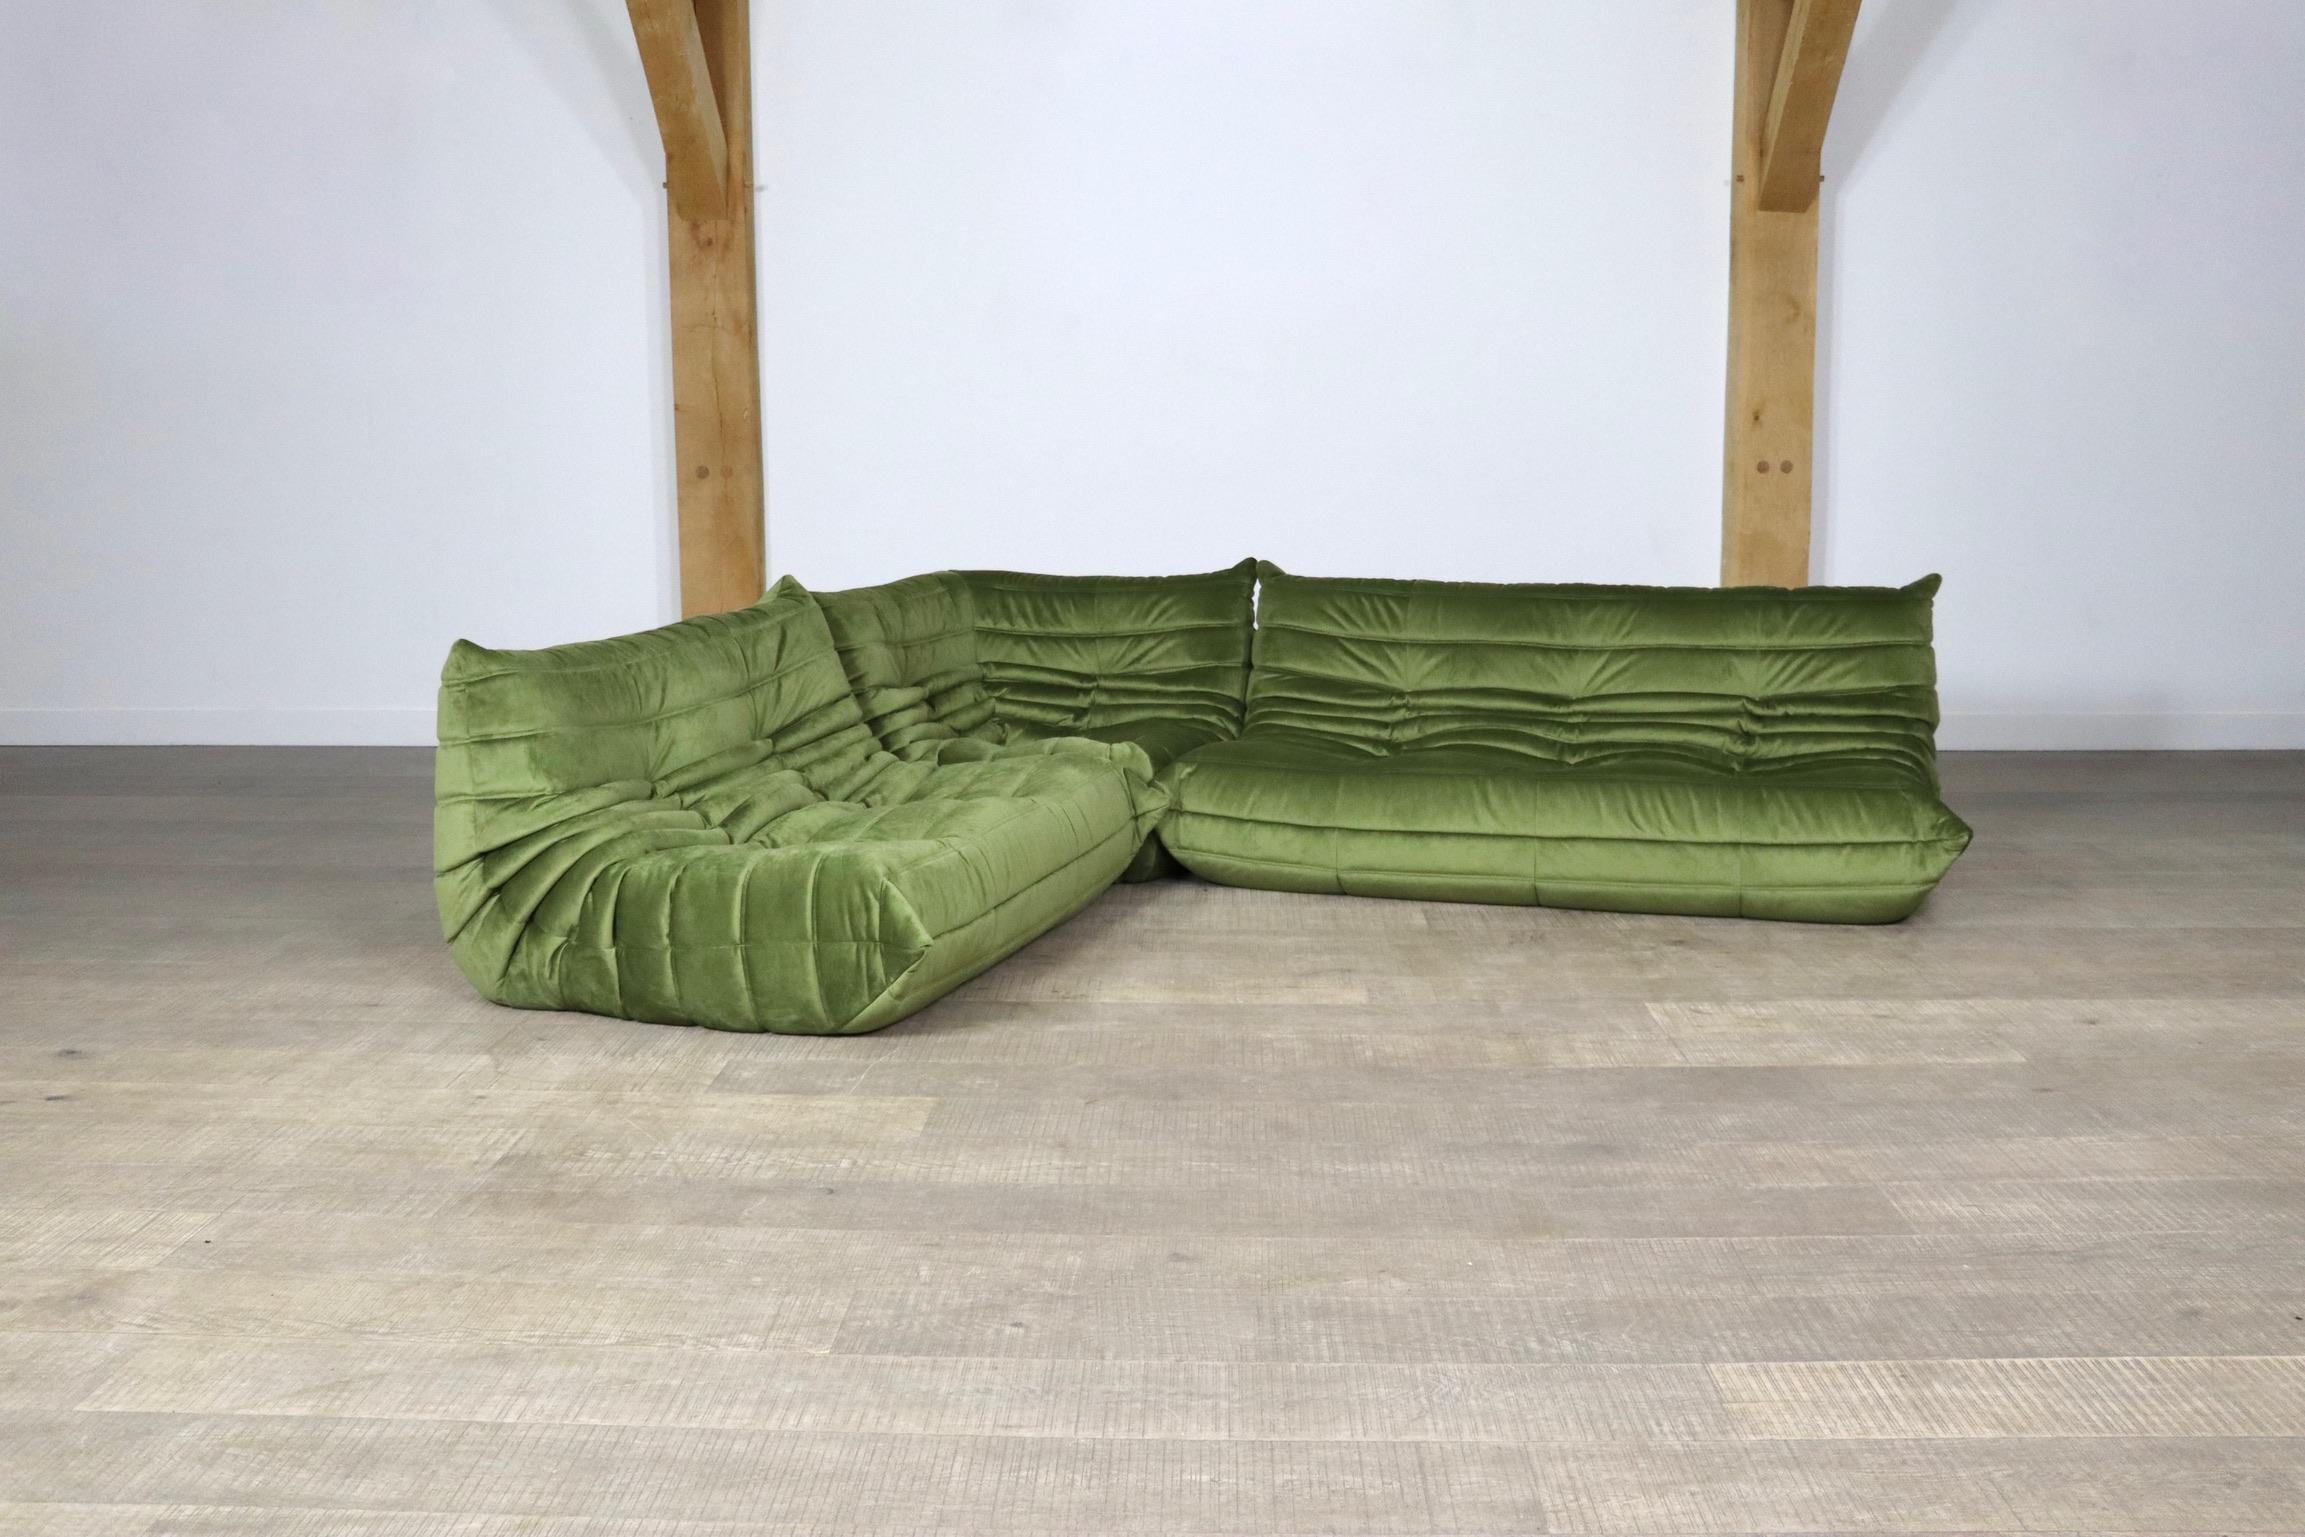 Incredible Ligne Roset Togo seating group in olive green velvet upholstery by Michel Ducaroy, 1970s. This iconic design has become more and more popular over the years. The lightweight design combined with fun colors and materials makes these sofas